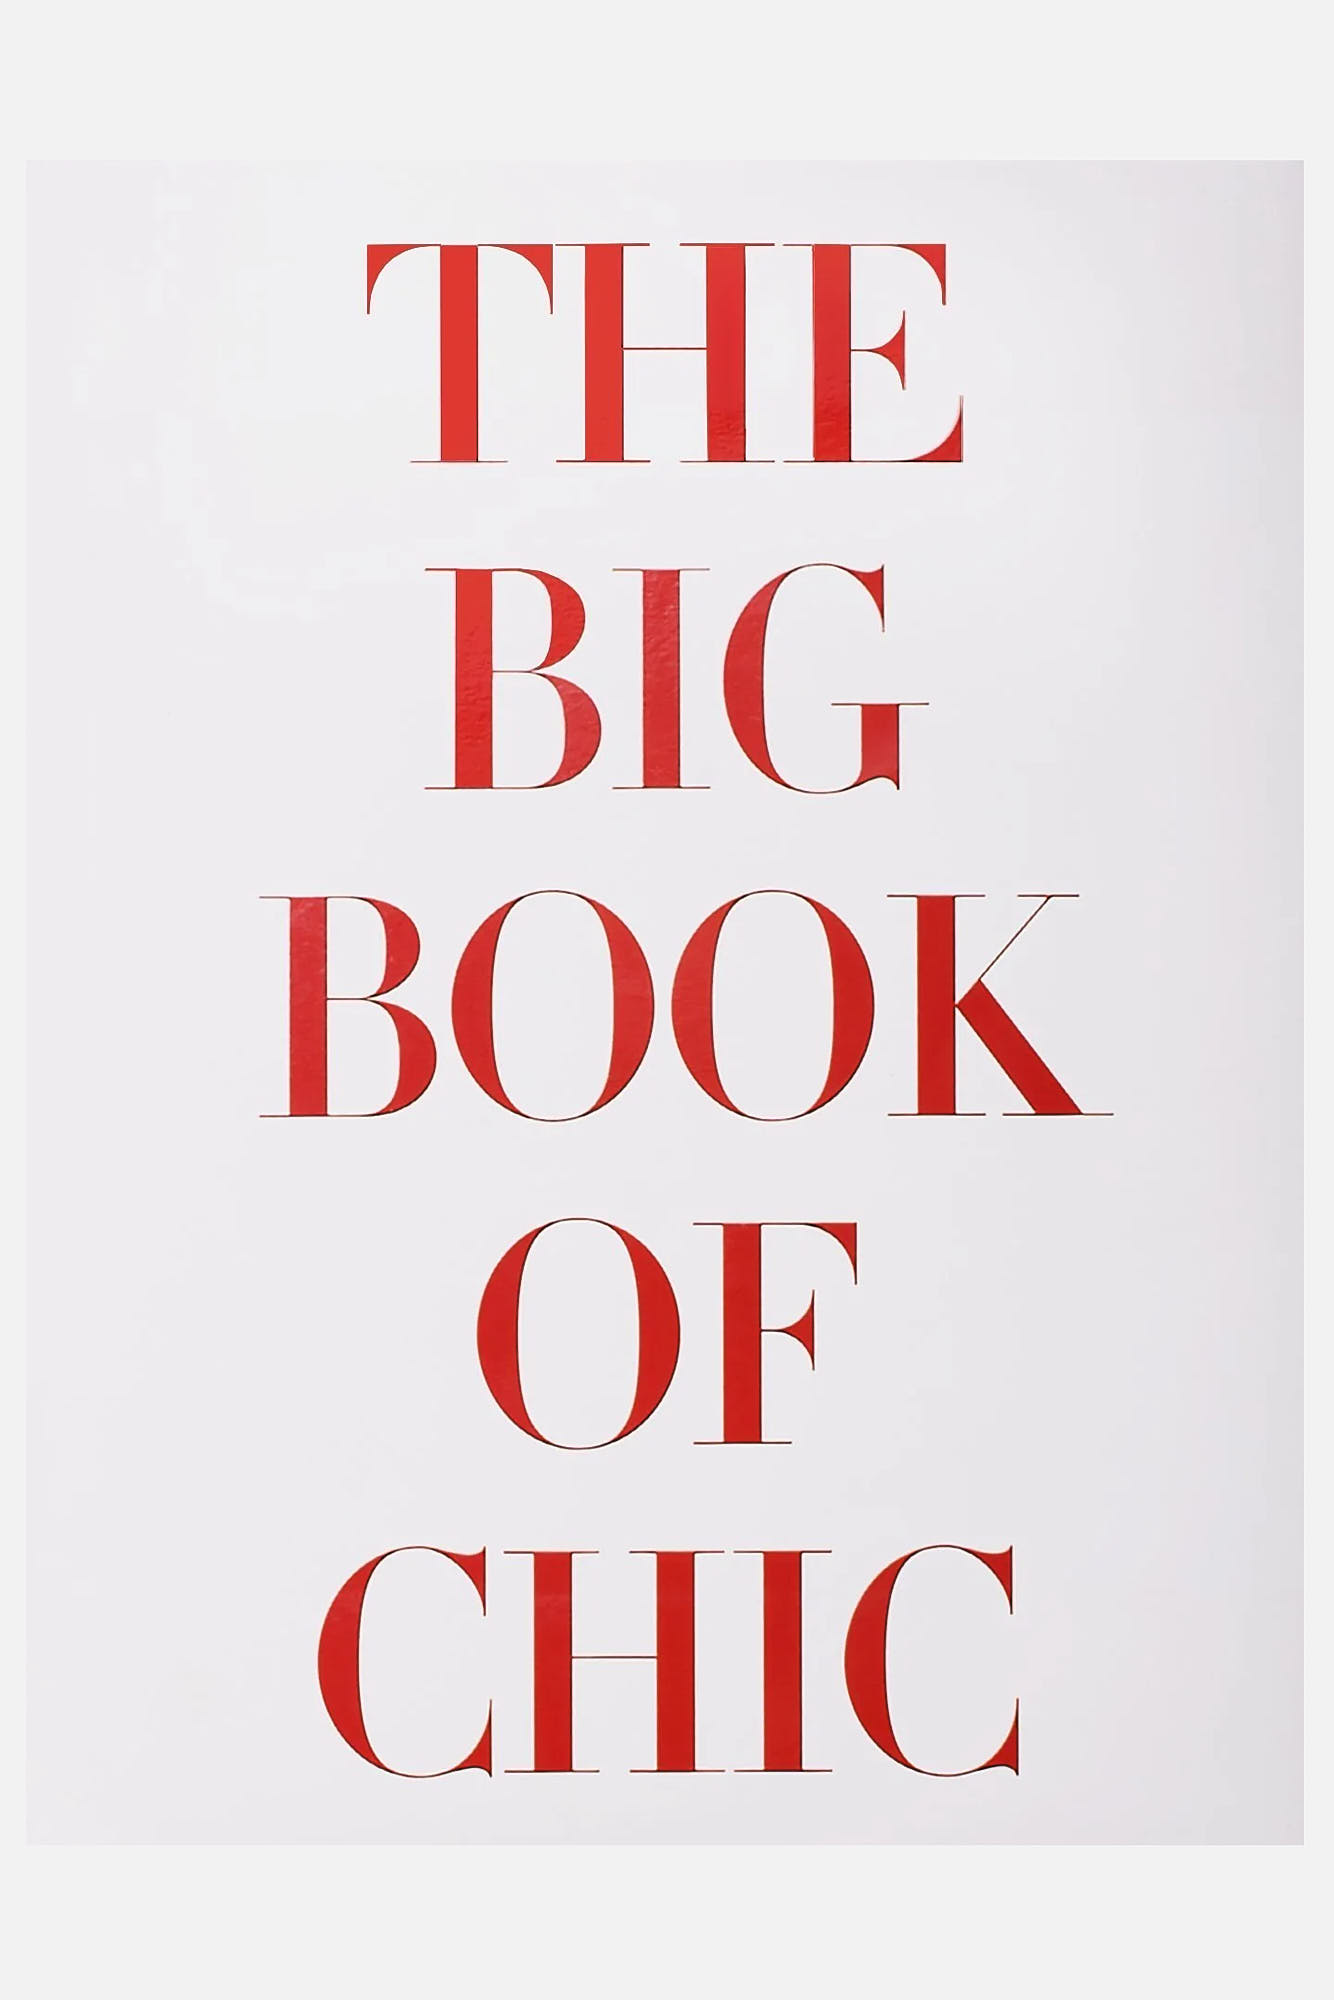 Book is big. Книга the New Chic. Big book. Big book of Chic. Biggest book.